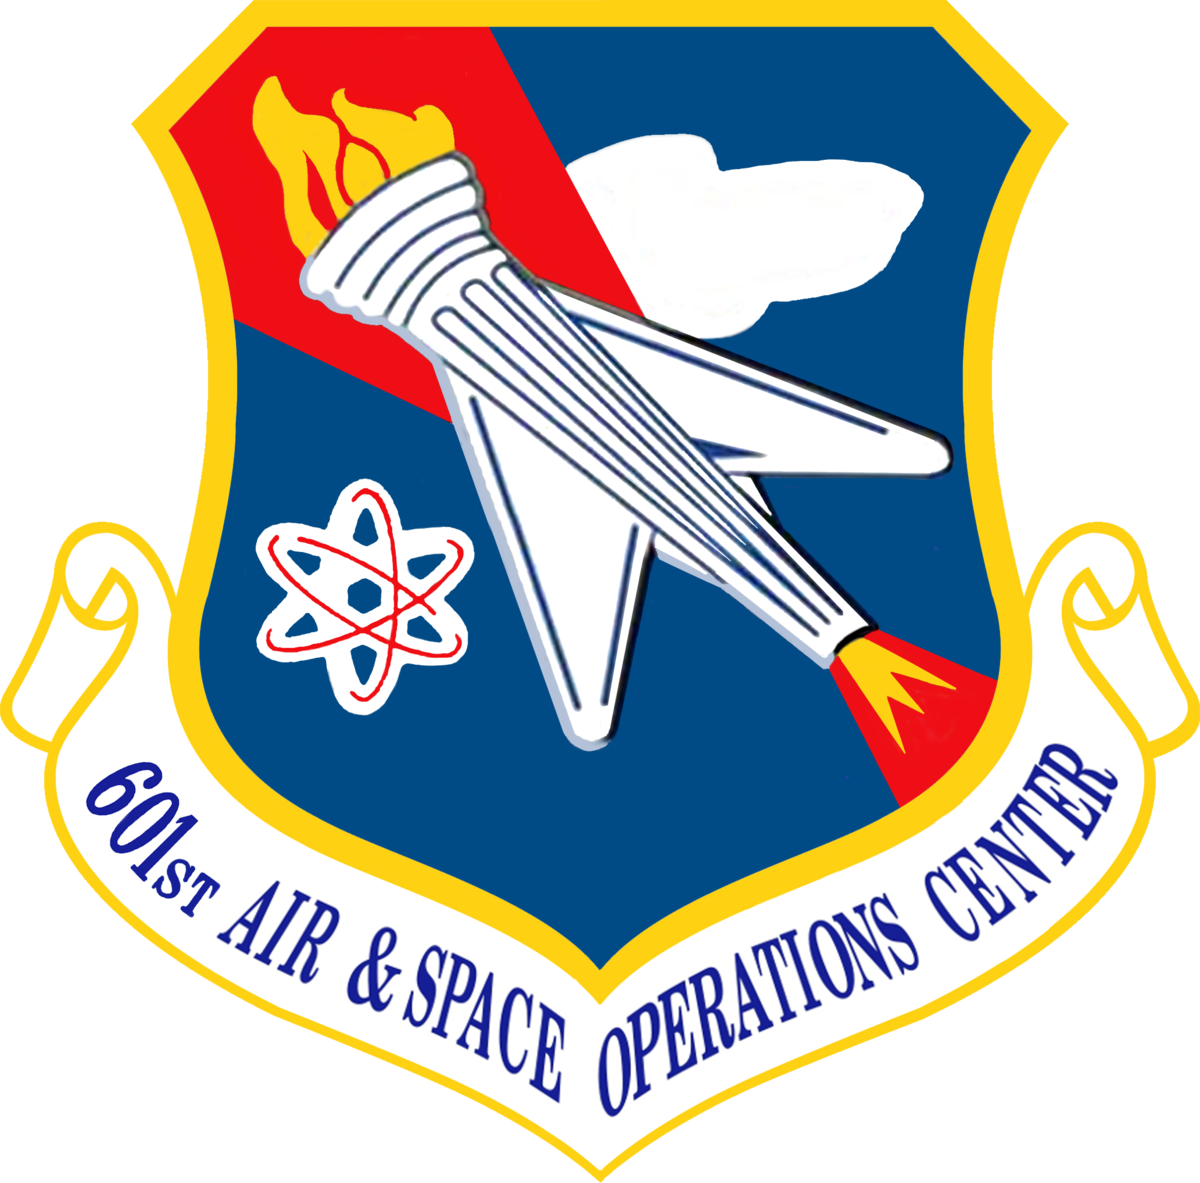 Foxy Operational Terms And Graphics Clip Art Medium - 379th Air Expeditionary Wing (1200x1183)